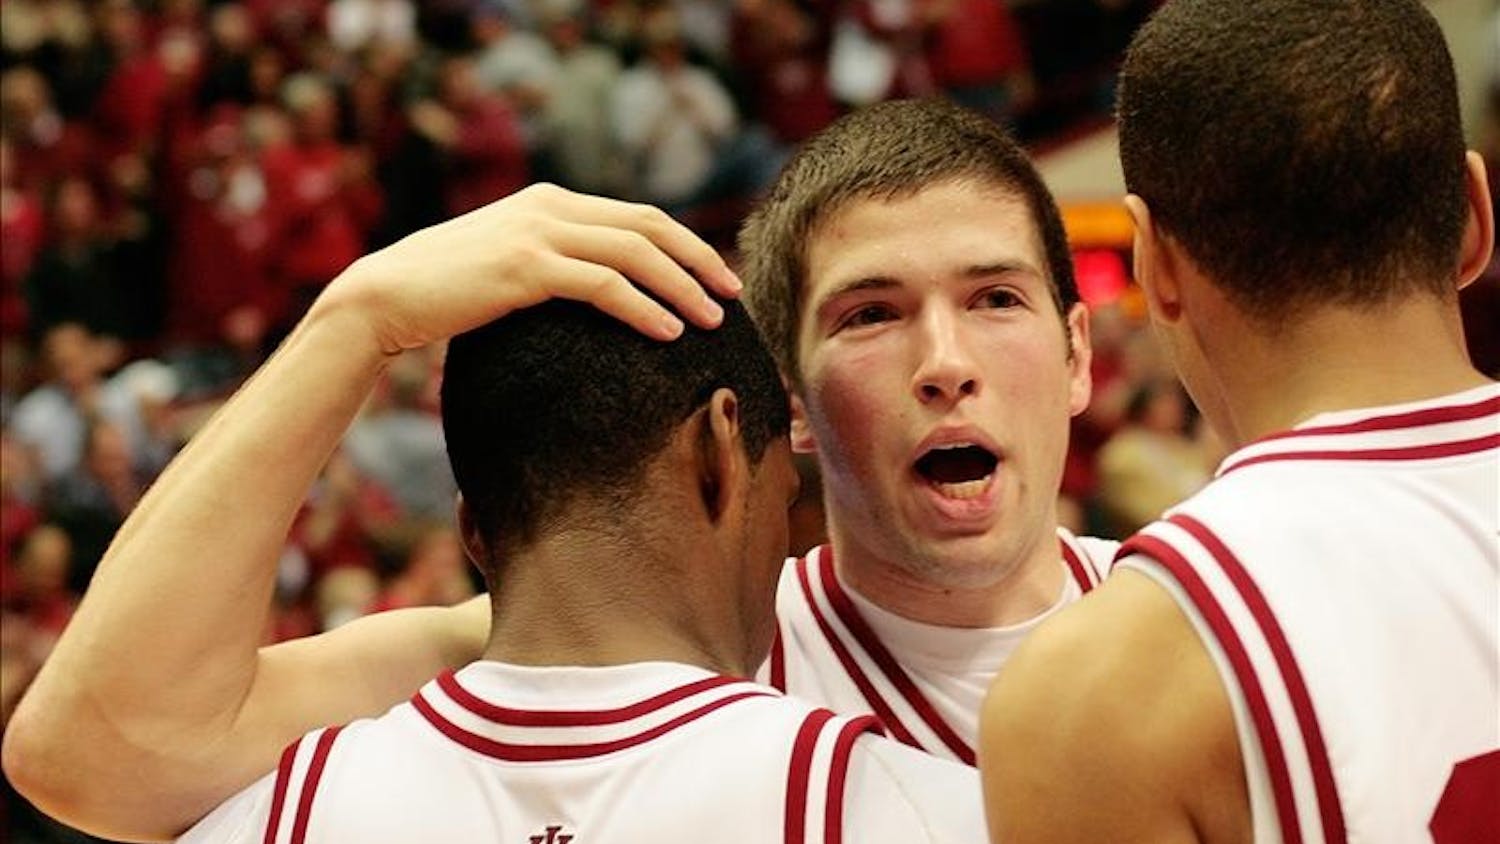 Freshman guard Matt Roth hugs junior guard Devan Dumes, left, and freshman guard Verdell Jones, right, following the Hoosiers 68-60 win over Iowa Wednesday night at Assembly Hall. The win ended an 11 game losing streak and was the Hoosiers first Big Ten victory.